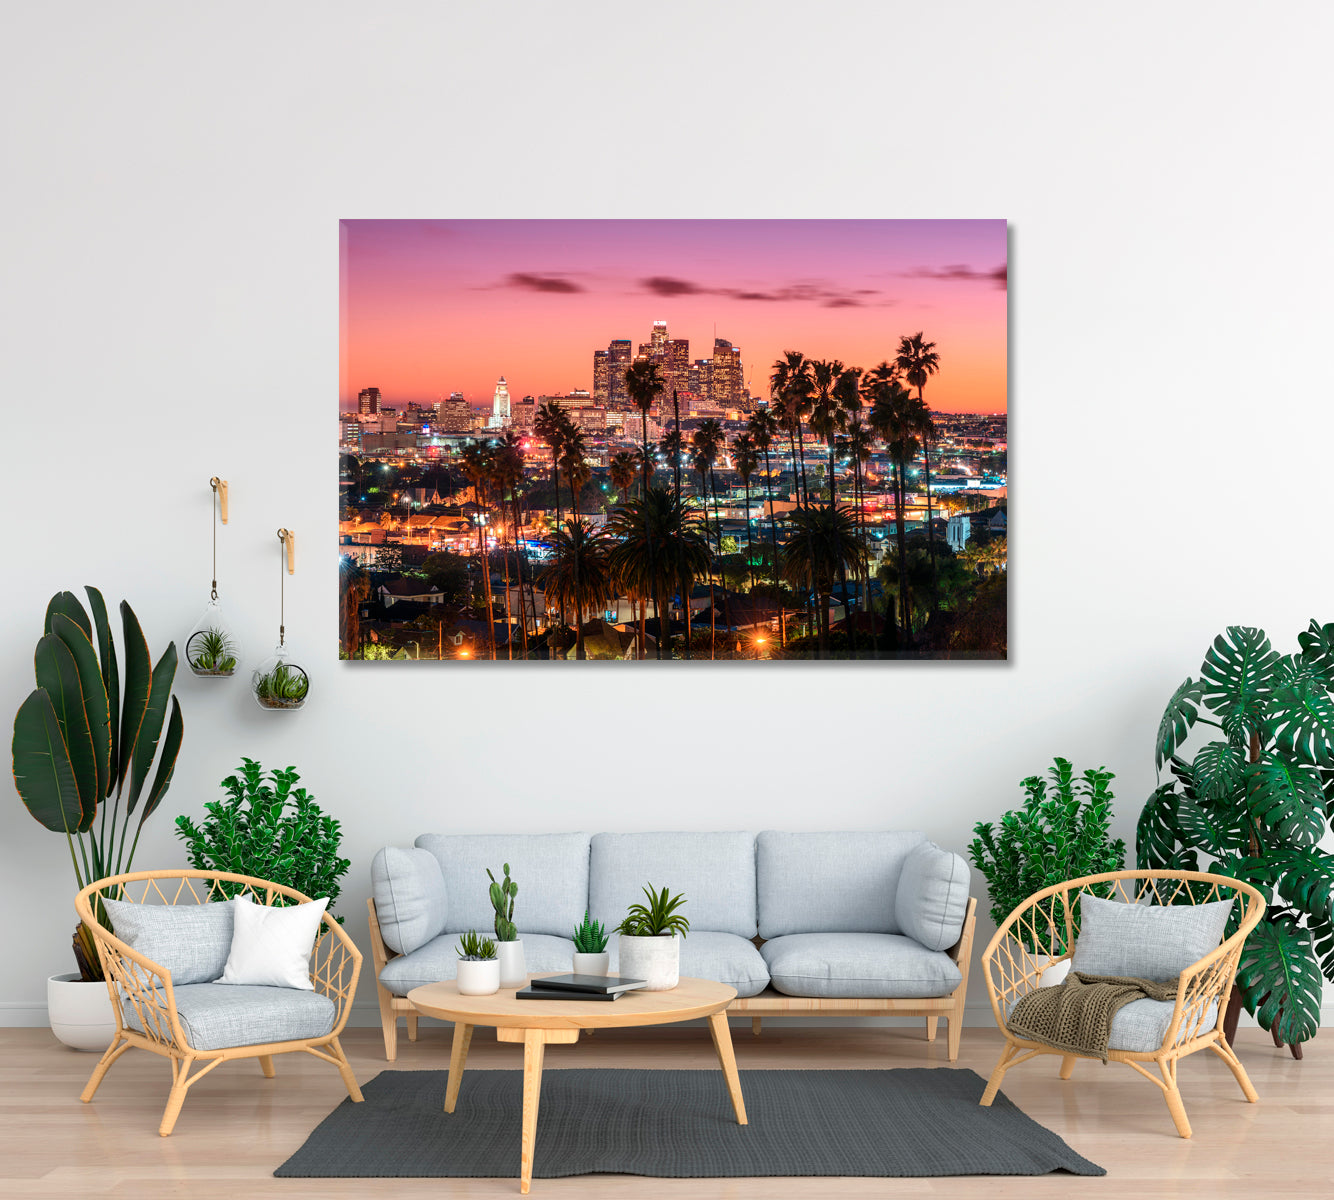 Amazing Sunset in Downtown Los Angeles Canvas Print ArtLexy 1 Panel 24"x16" inches 